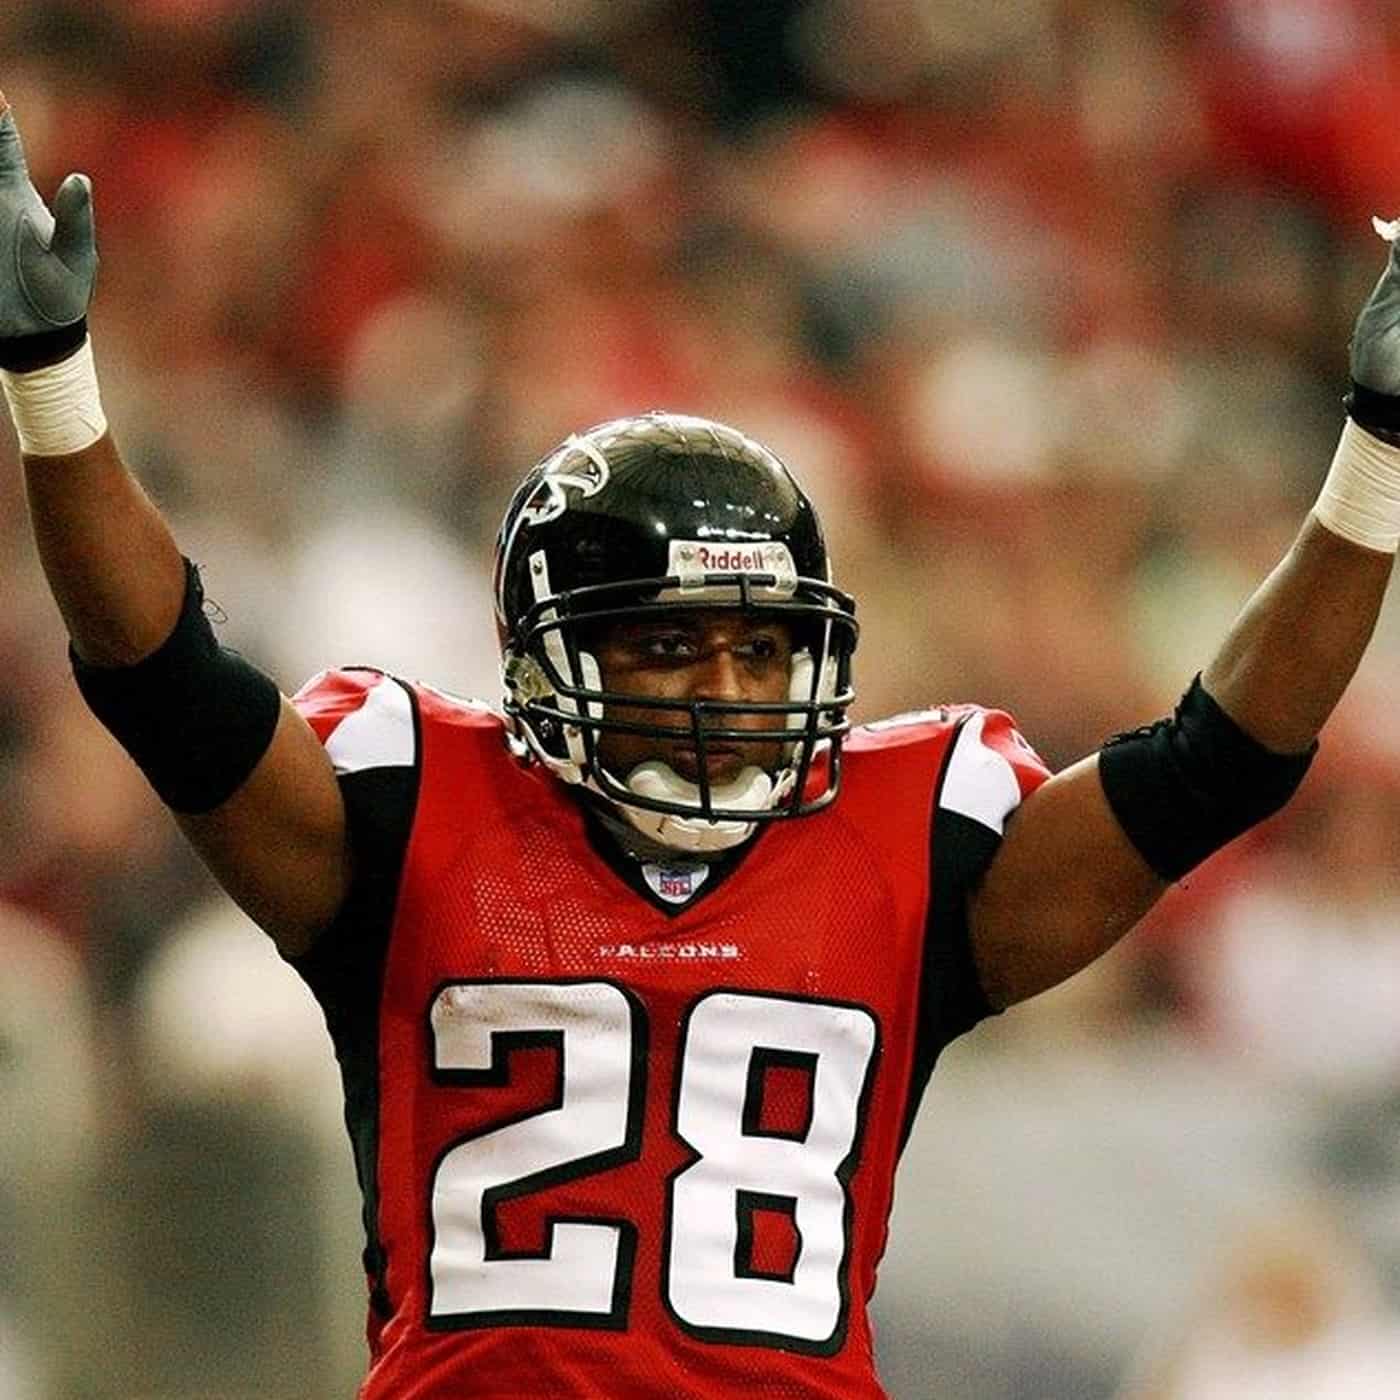 Warrick Dunn’s Net Worth, Height, Age, & Personal Info Wiki The New